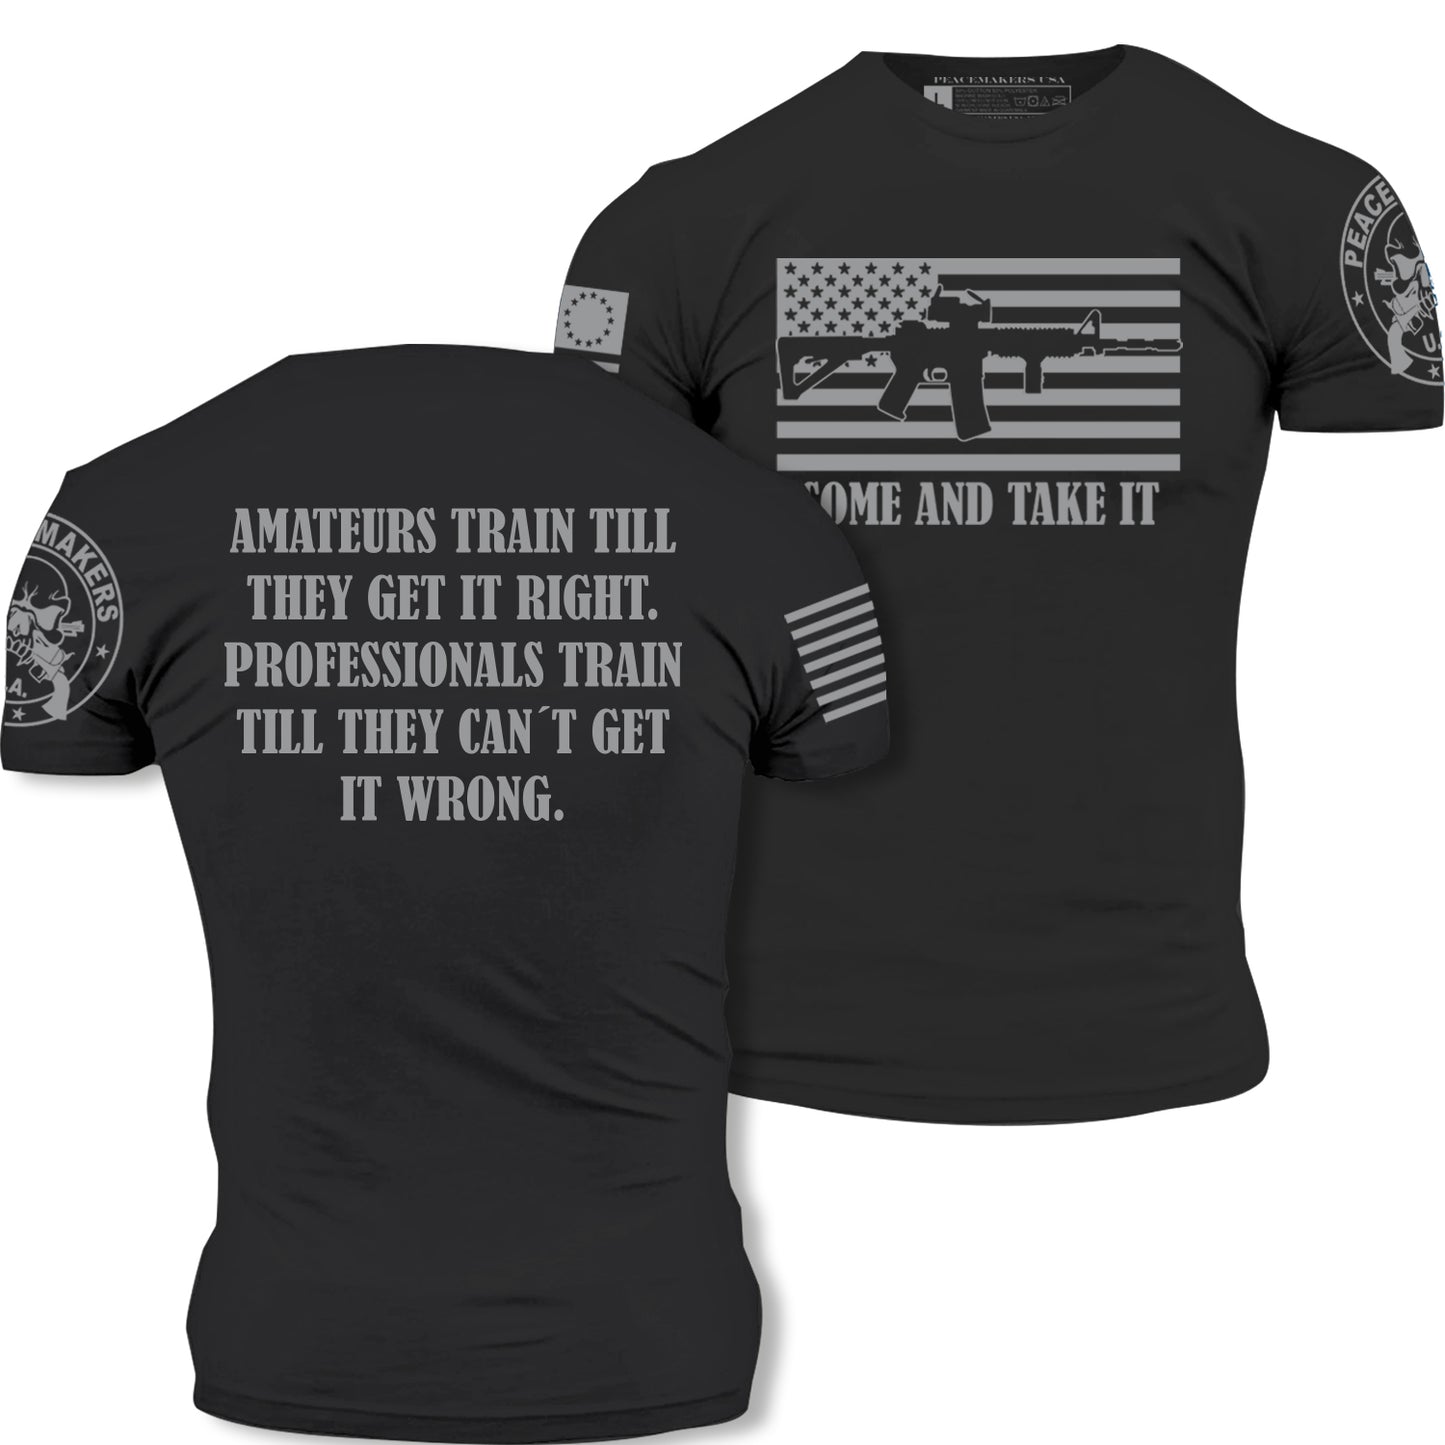 "COME AND TAKE IT" Authentic Military-Inspired T-Shirts by US Veterans - (Healther Black)